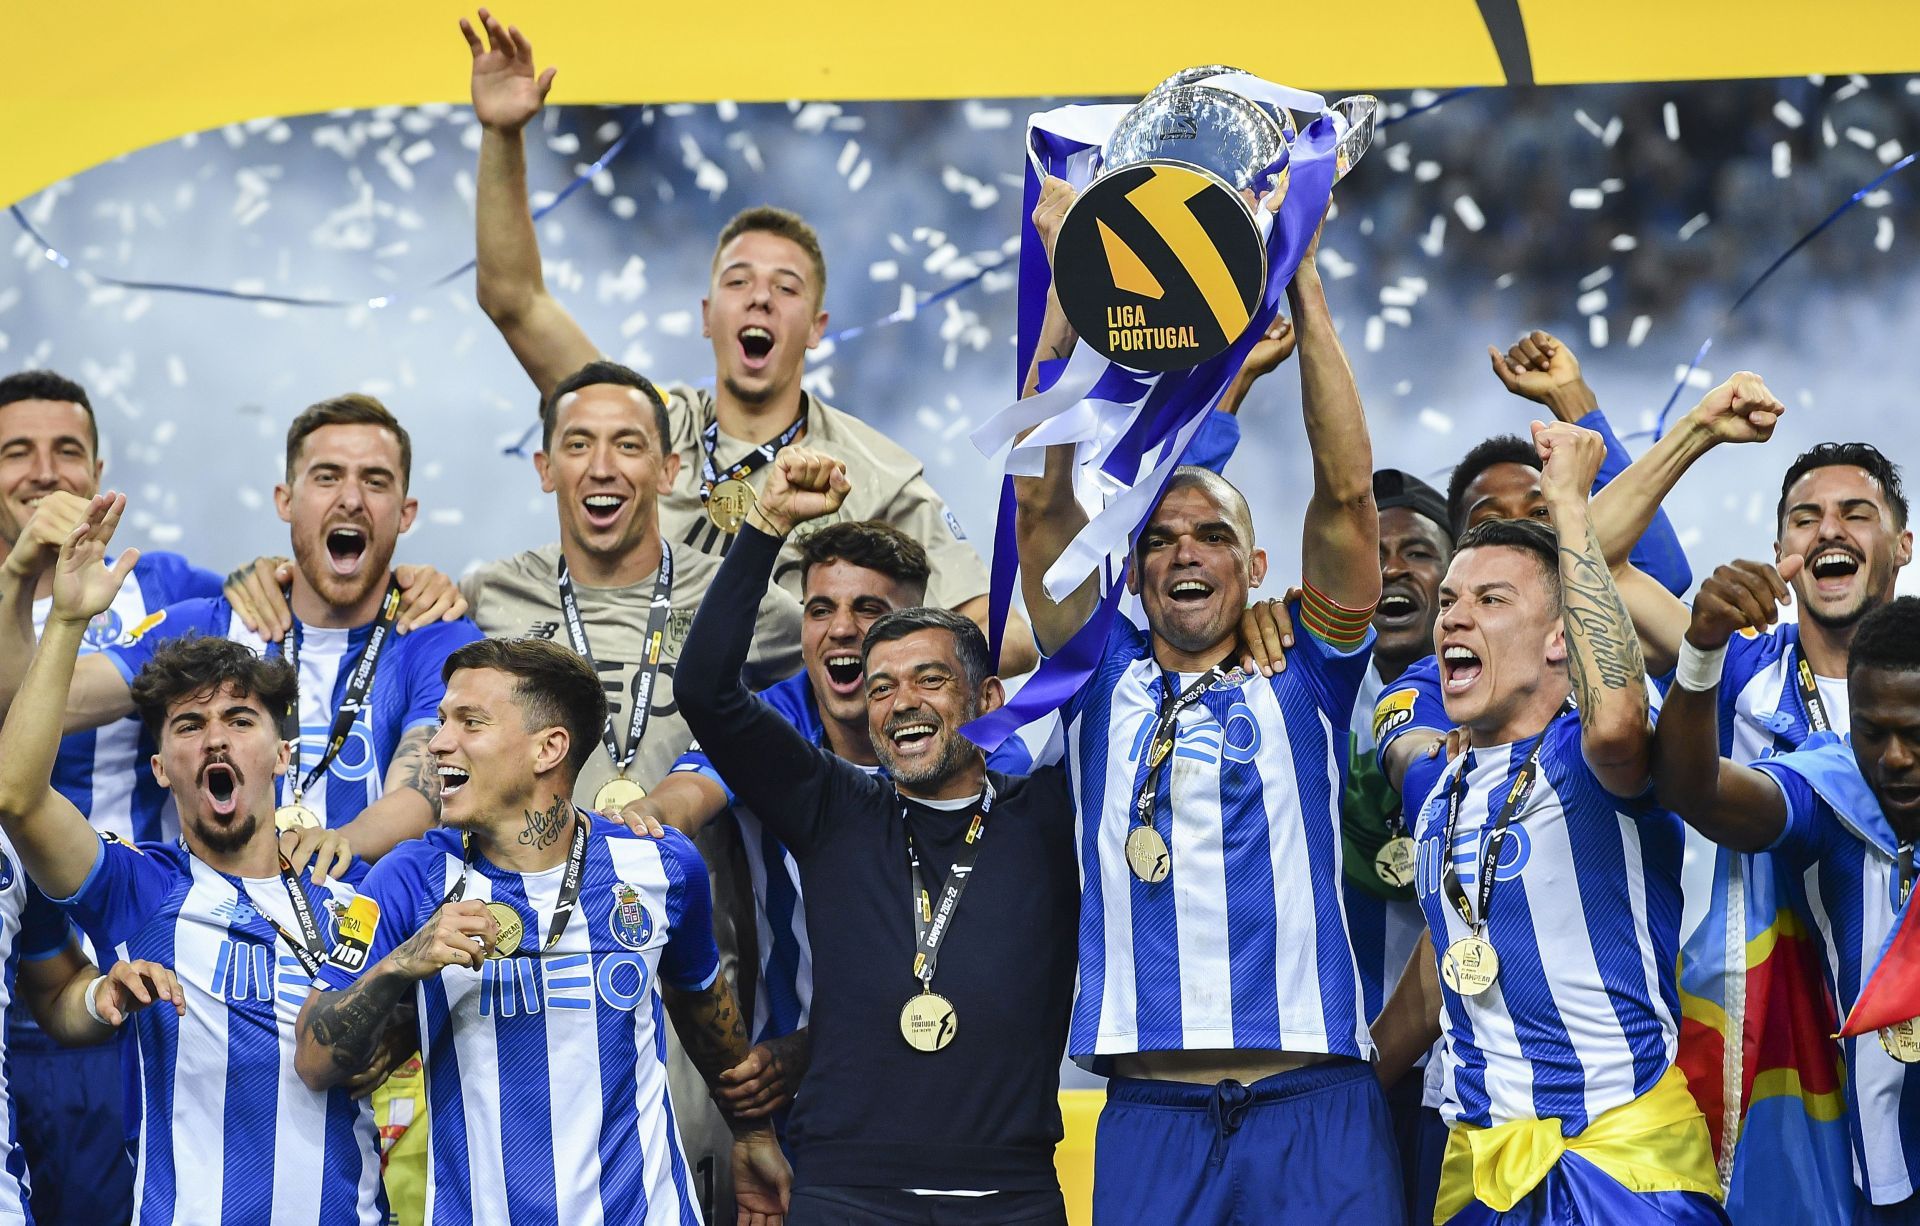 Reigning champions Porto will take on Maritimo in their Primeira Liga opener on Saturday.